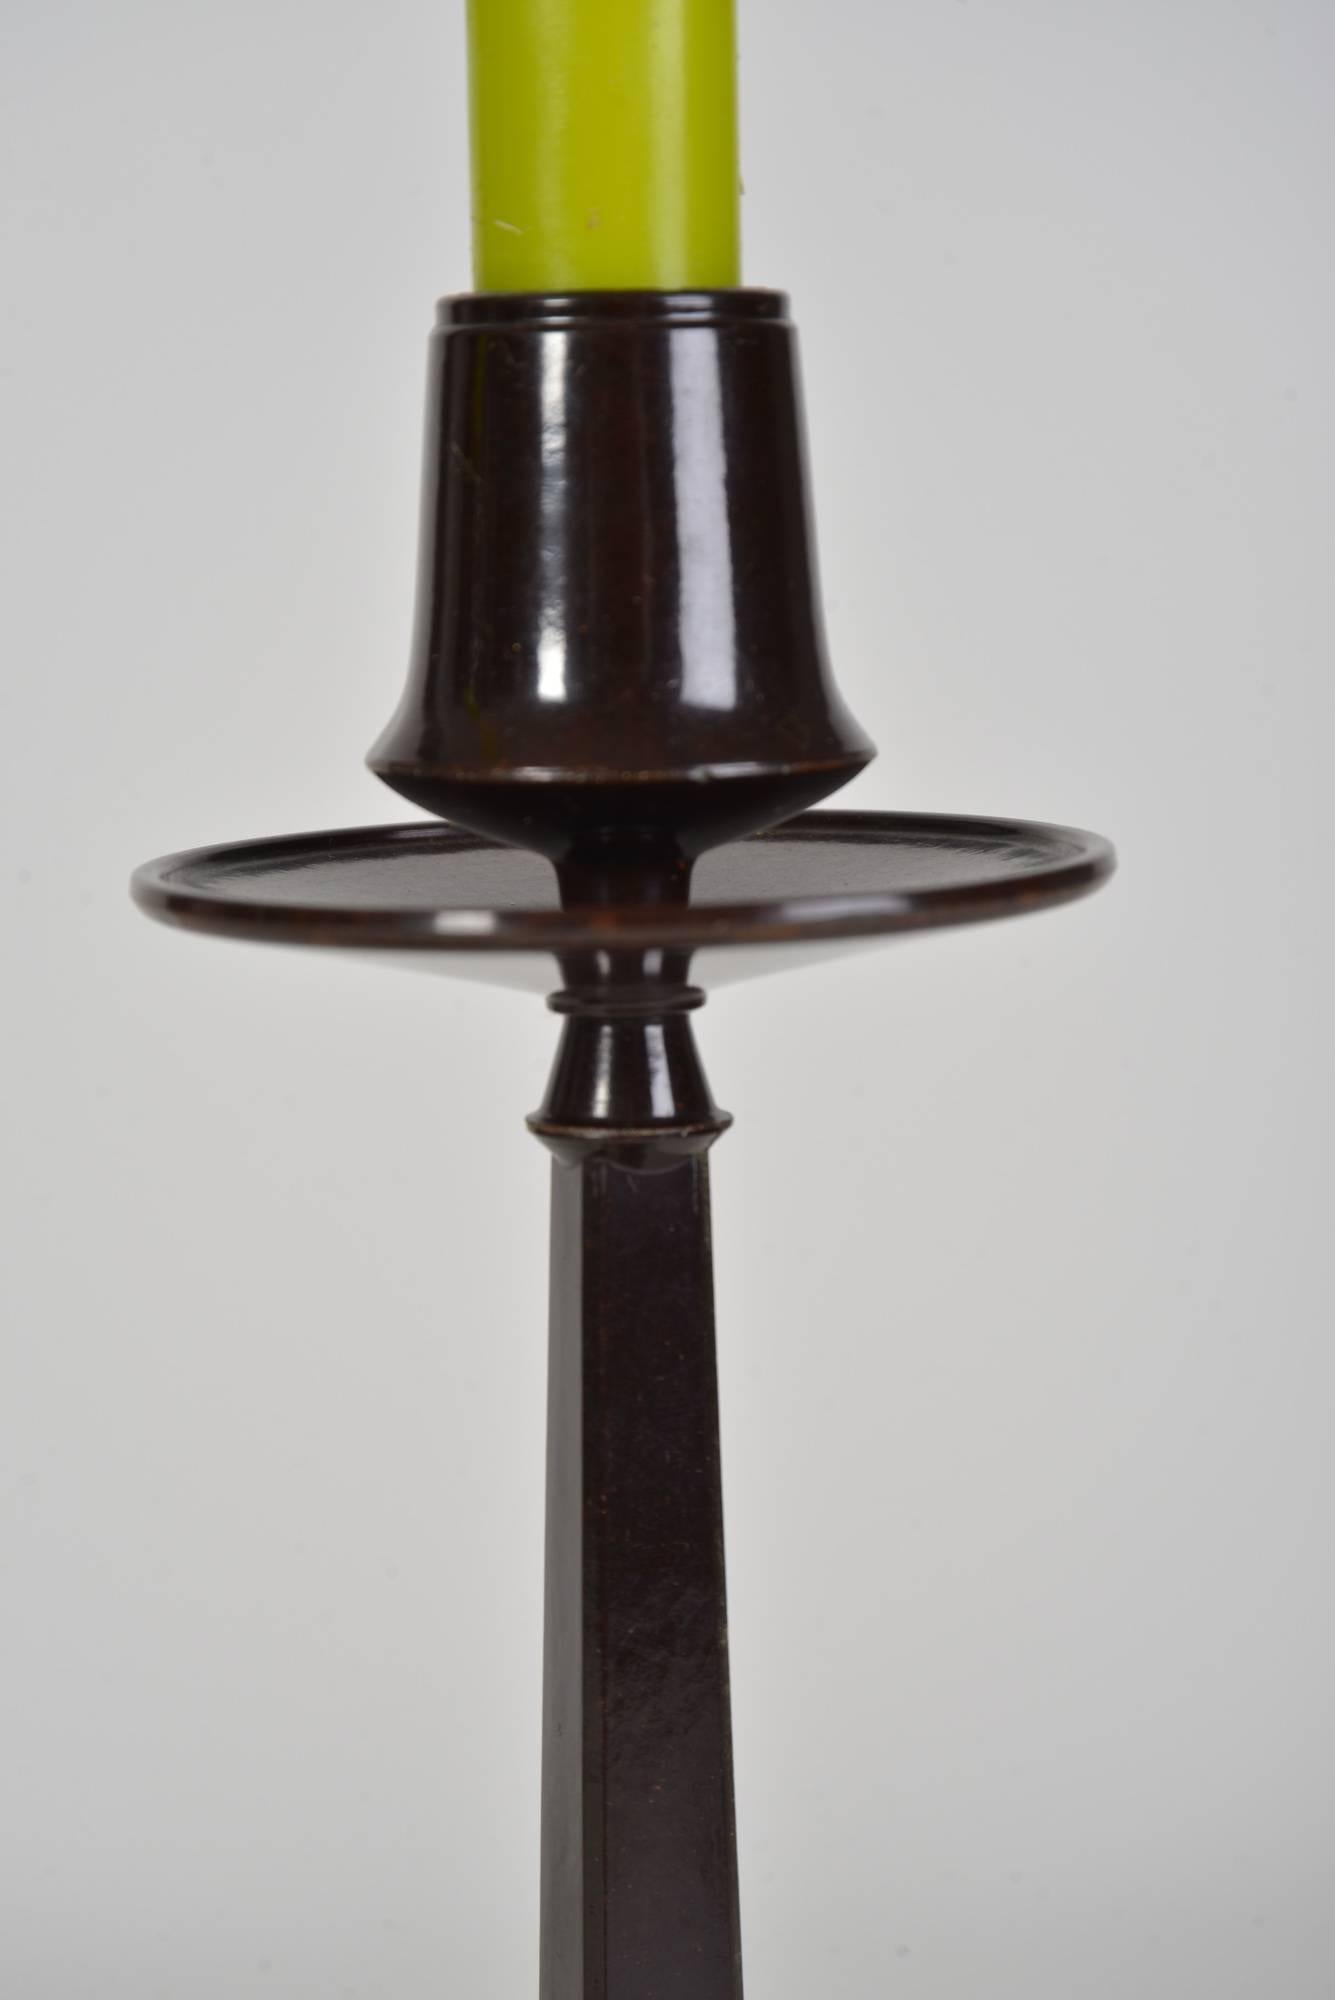 Pair of Bakelite Candlesticks by Charles R. Mackintosh In Excellent Condition For Sale In Oisterwijk, NL